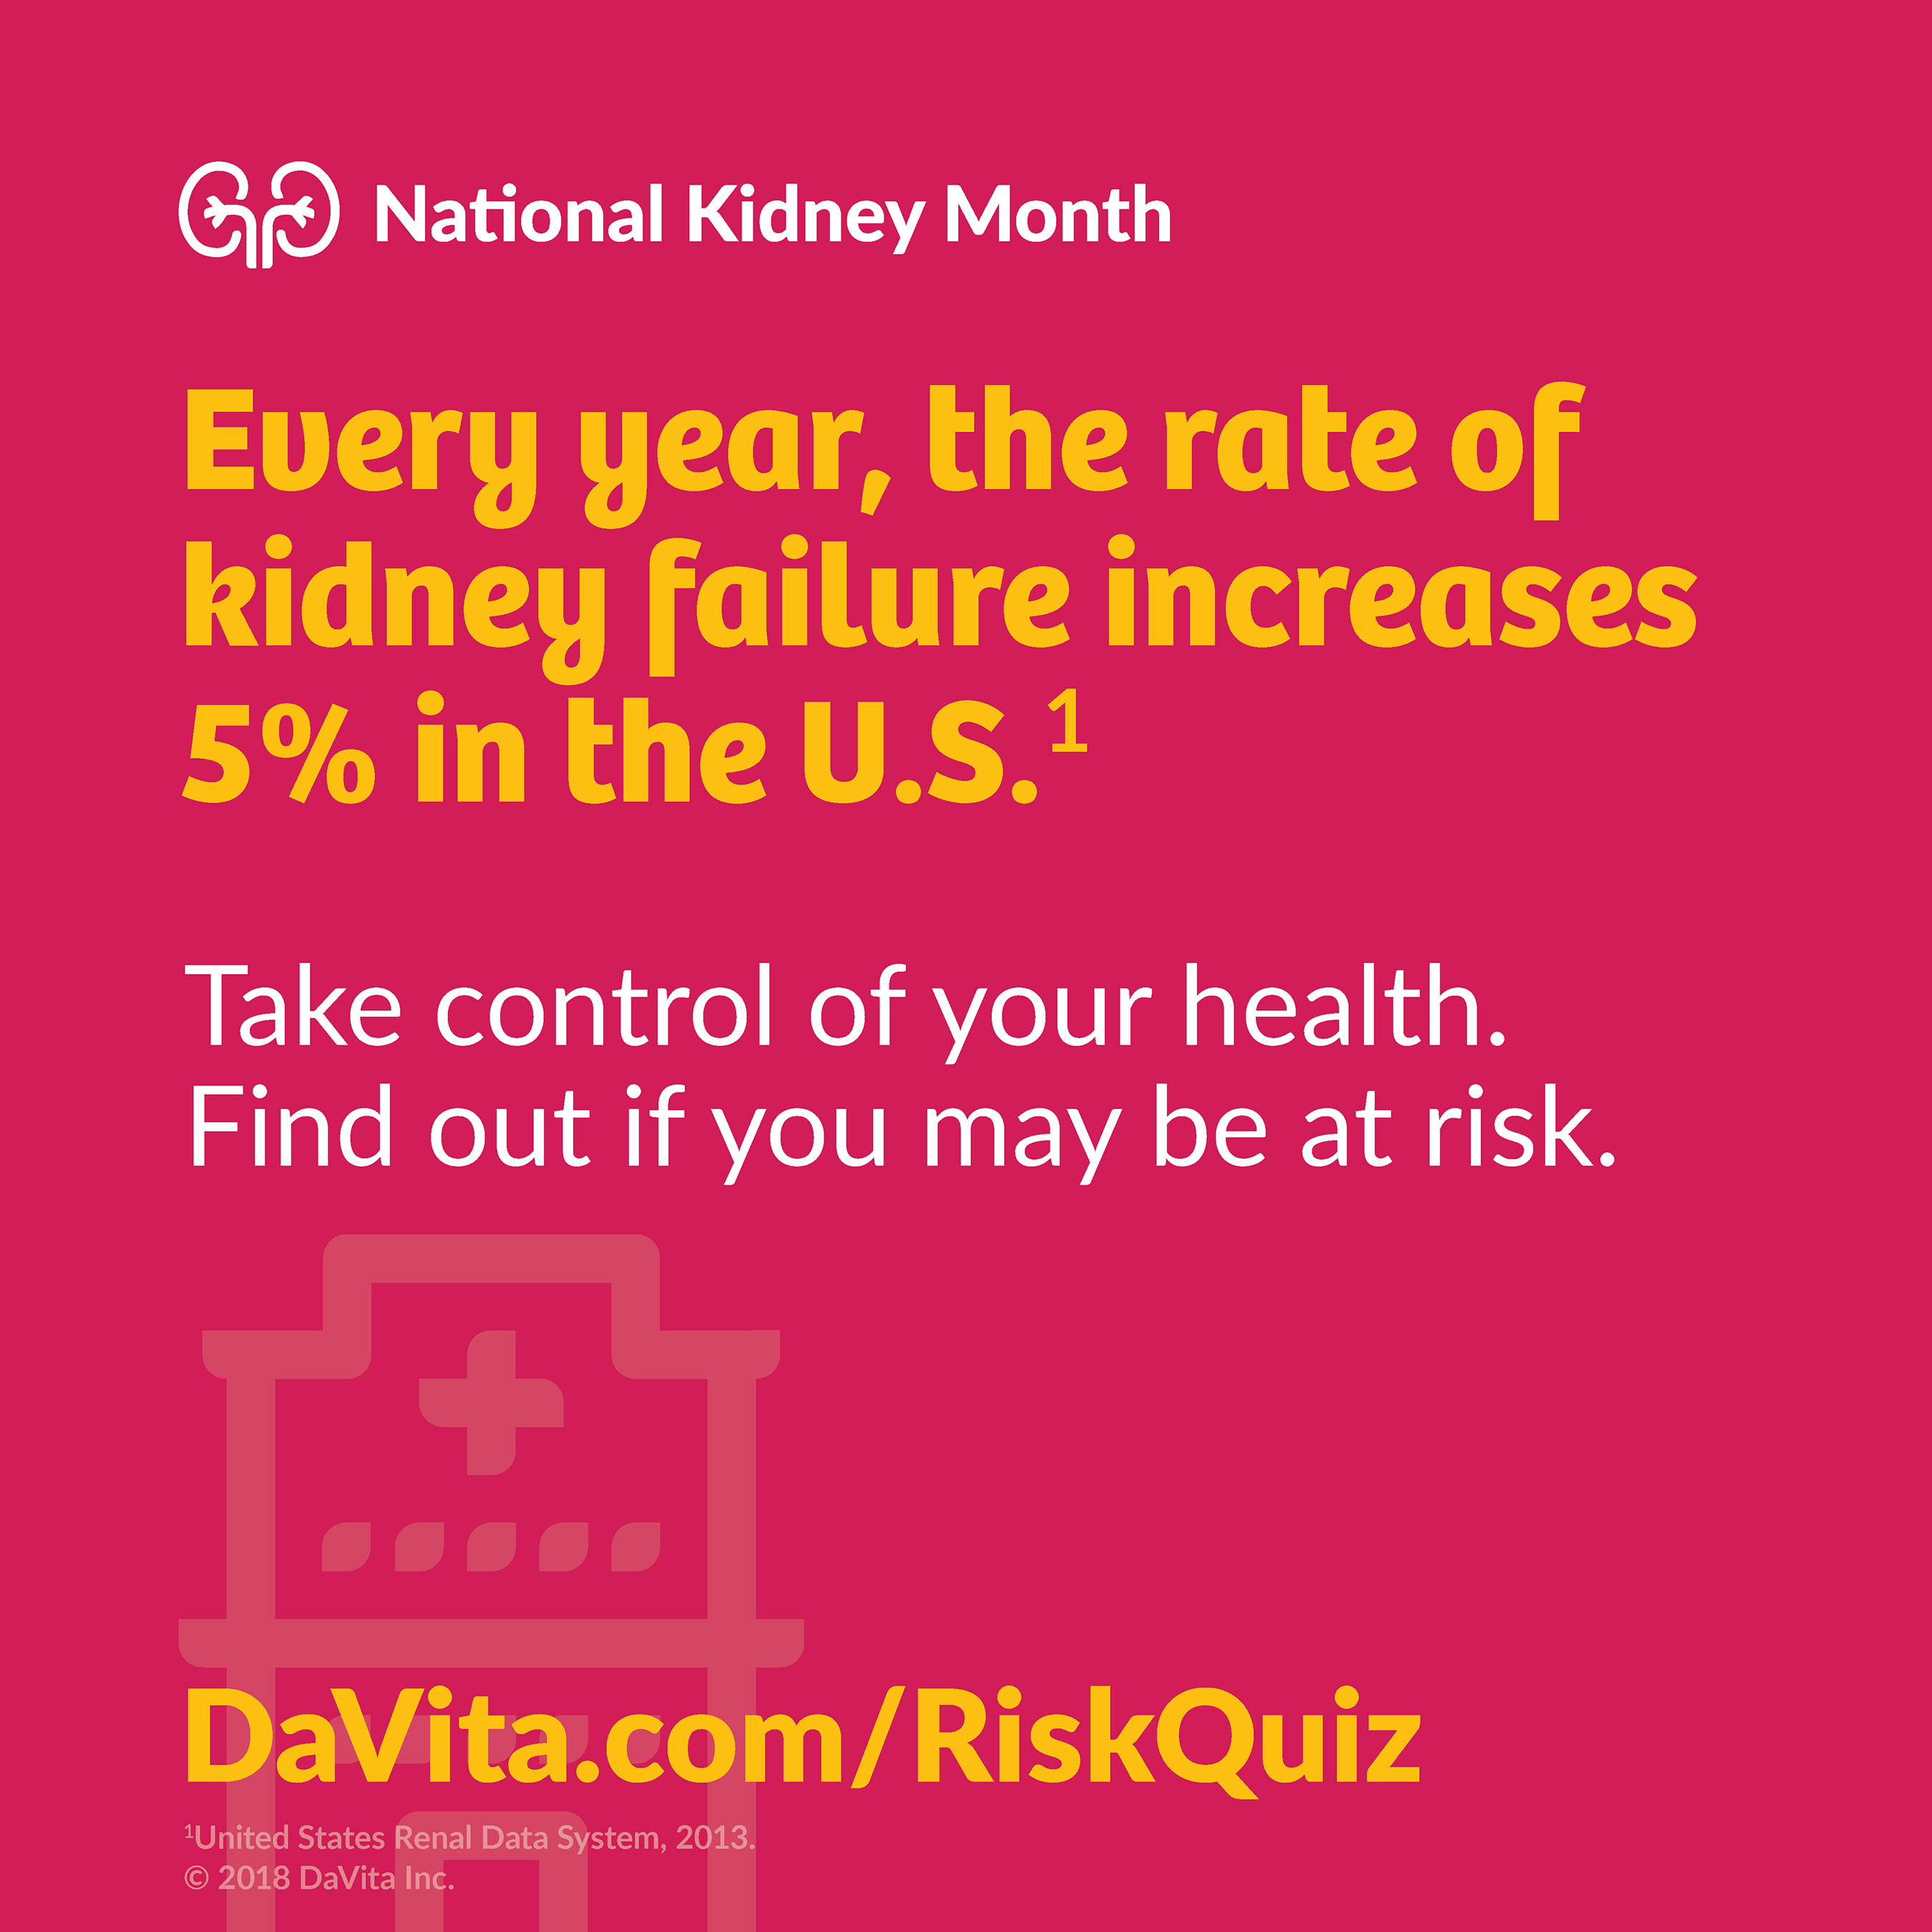 Every year, the rate of kidney failure increases 5% in the U.S.